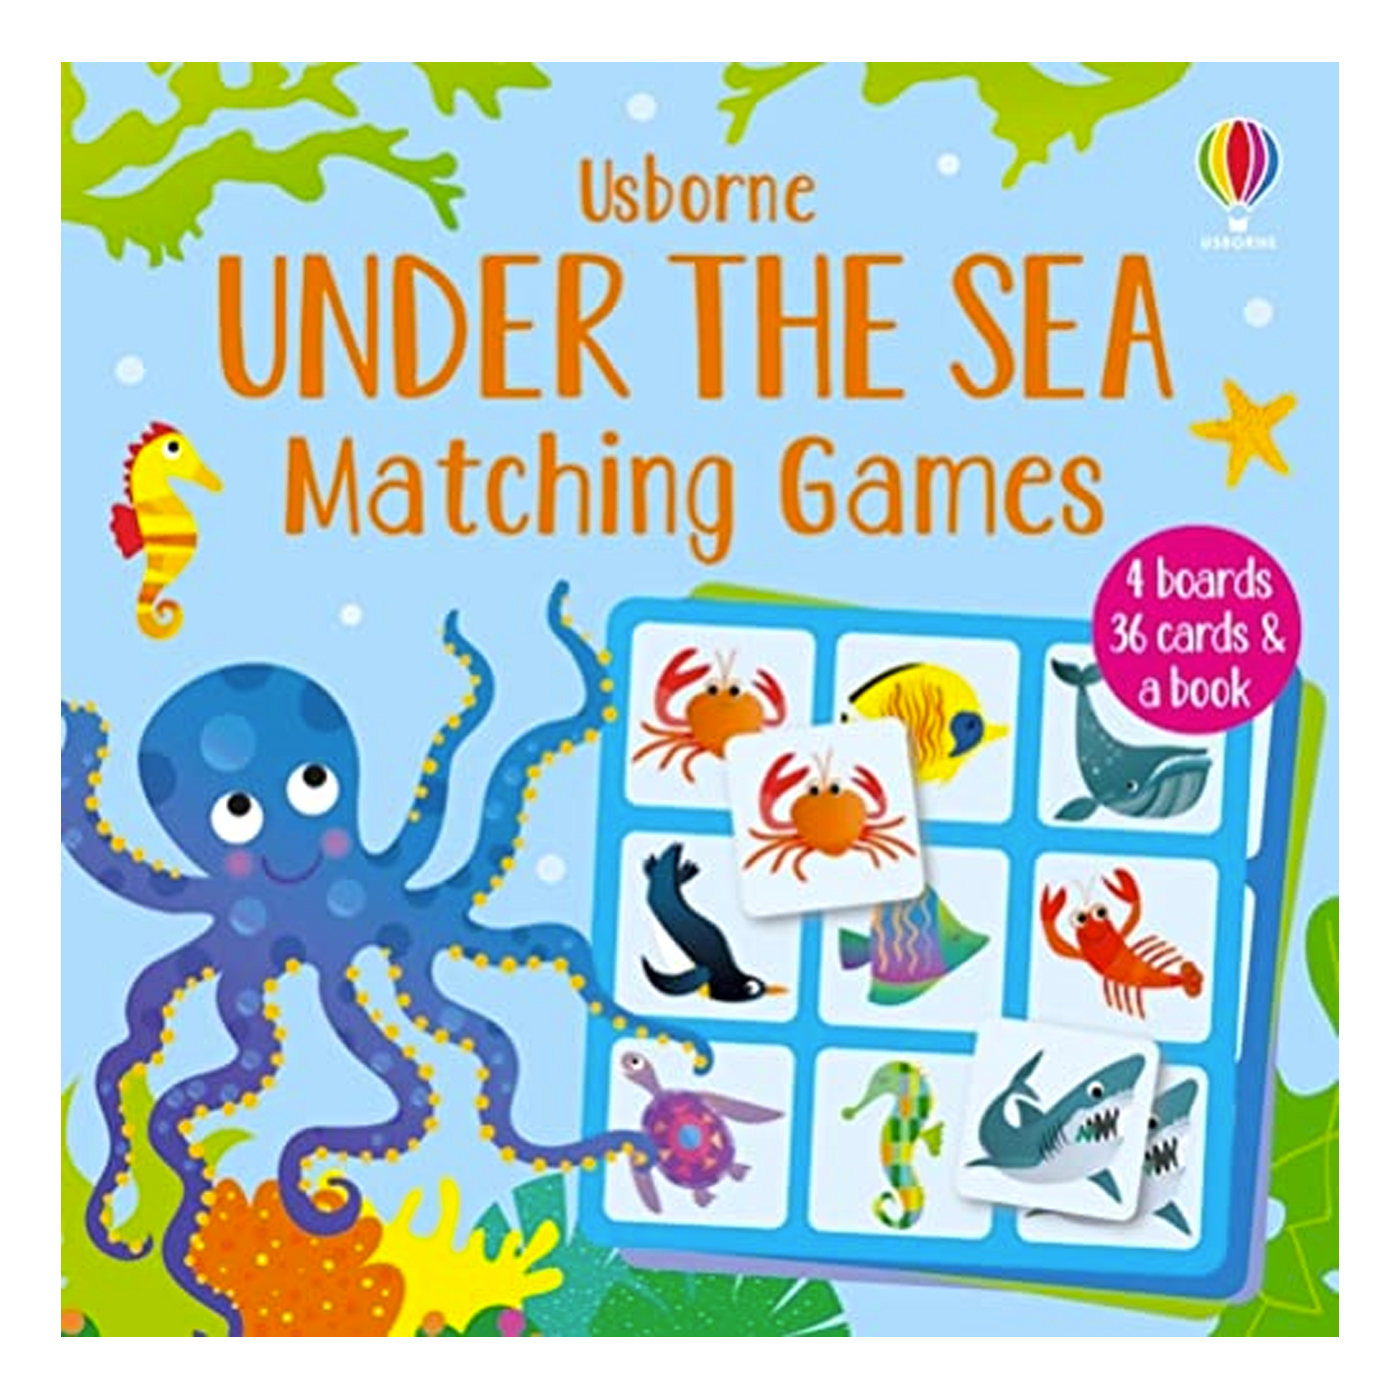  Under The Sea Matching Games